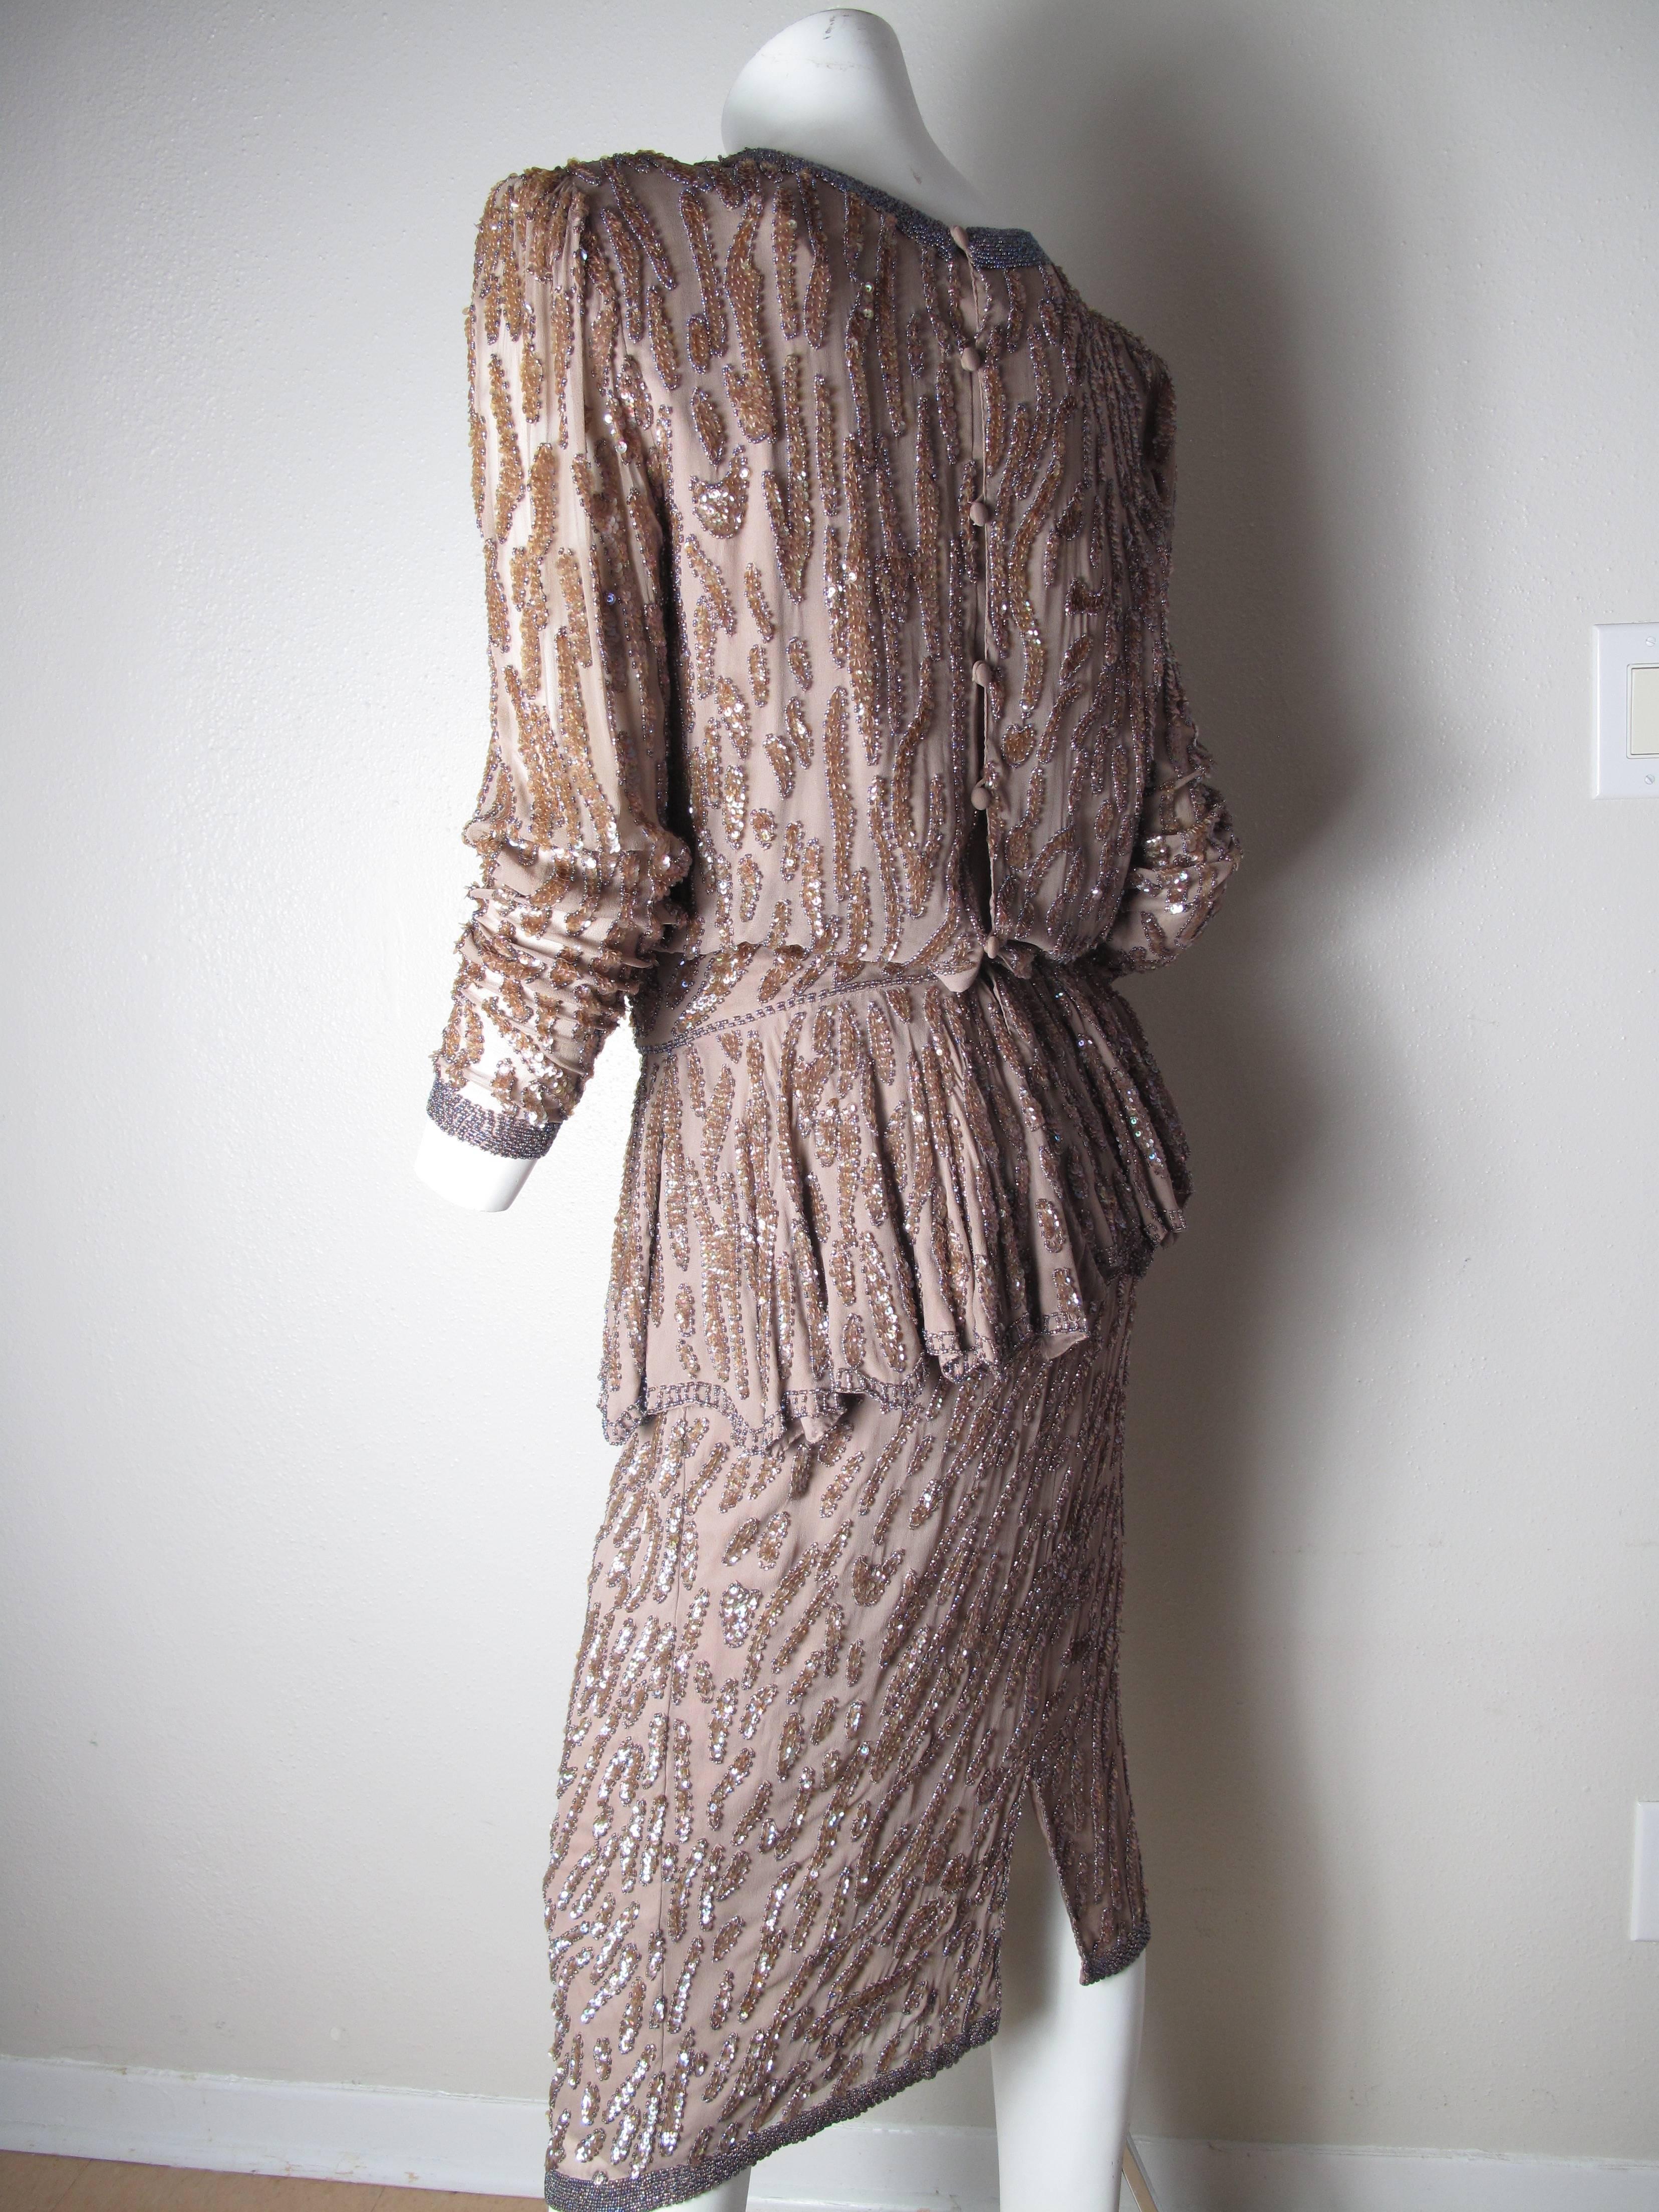 Oleg Cassini pewter beaded silk top and skirt.  Condition: Excellent. Size 10
Fits current size 8
Top:
40